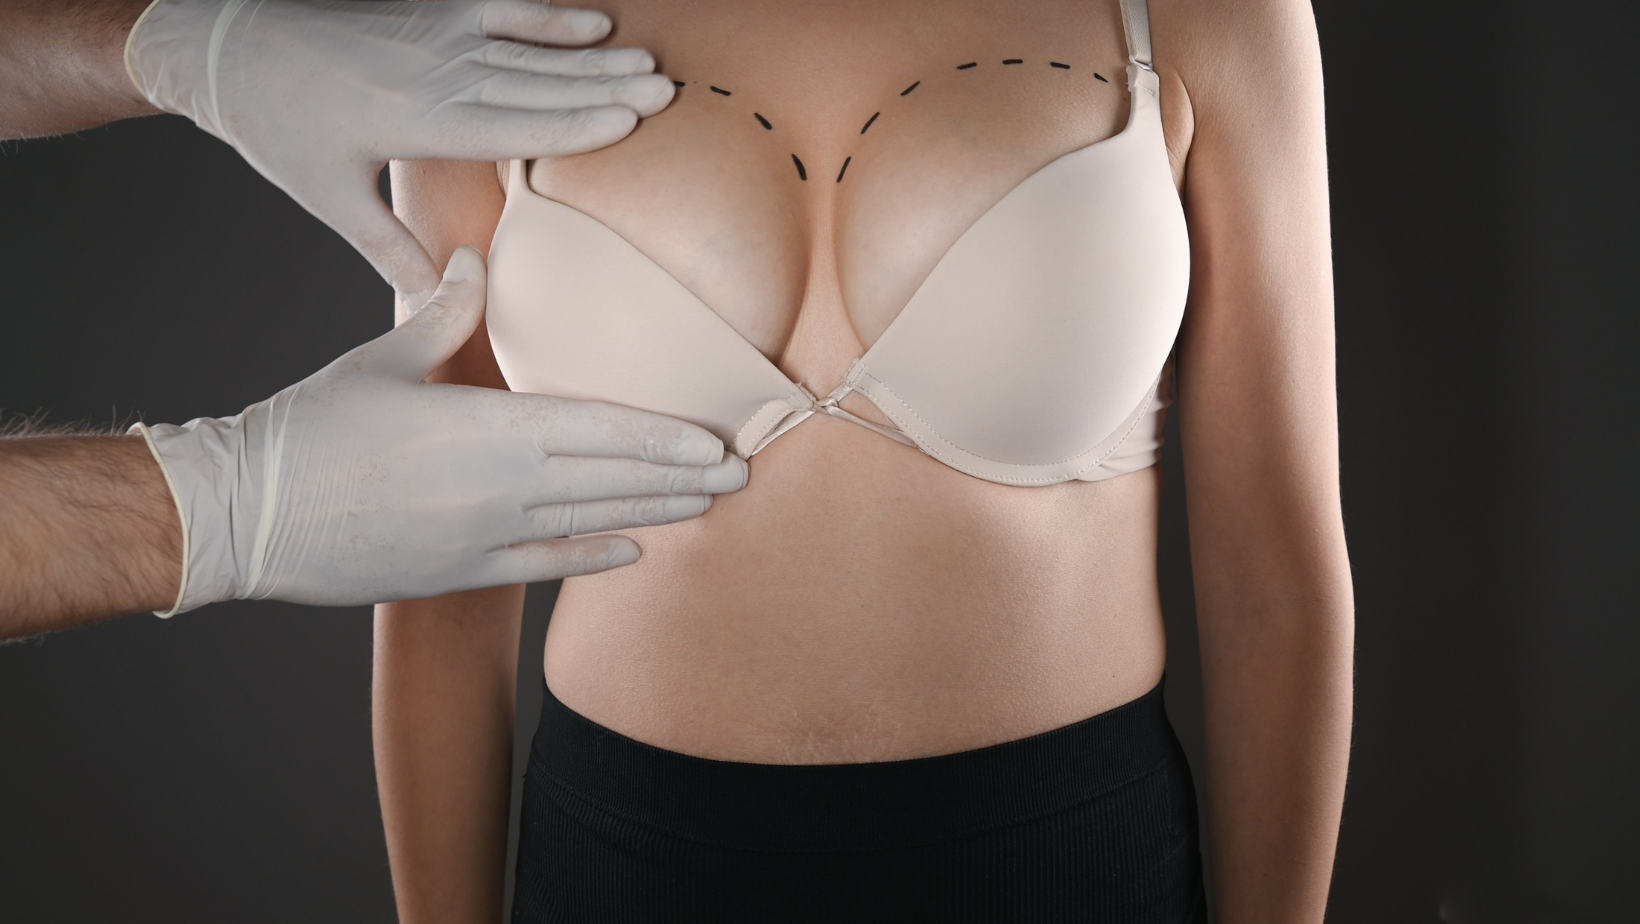 Can Different Sized Implants Correct Asymmetrical Breasts? - Wall